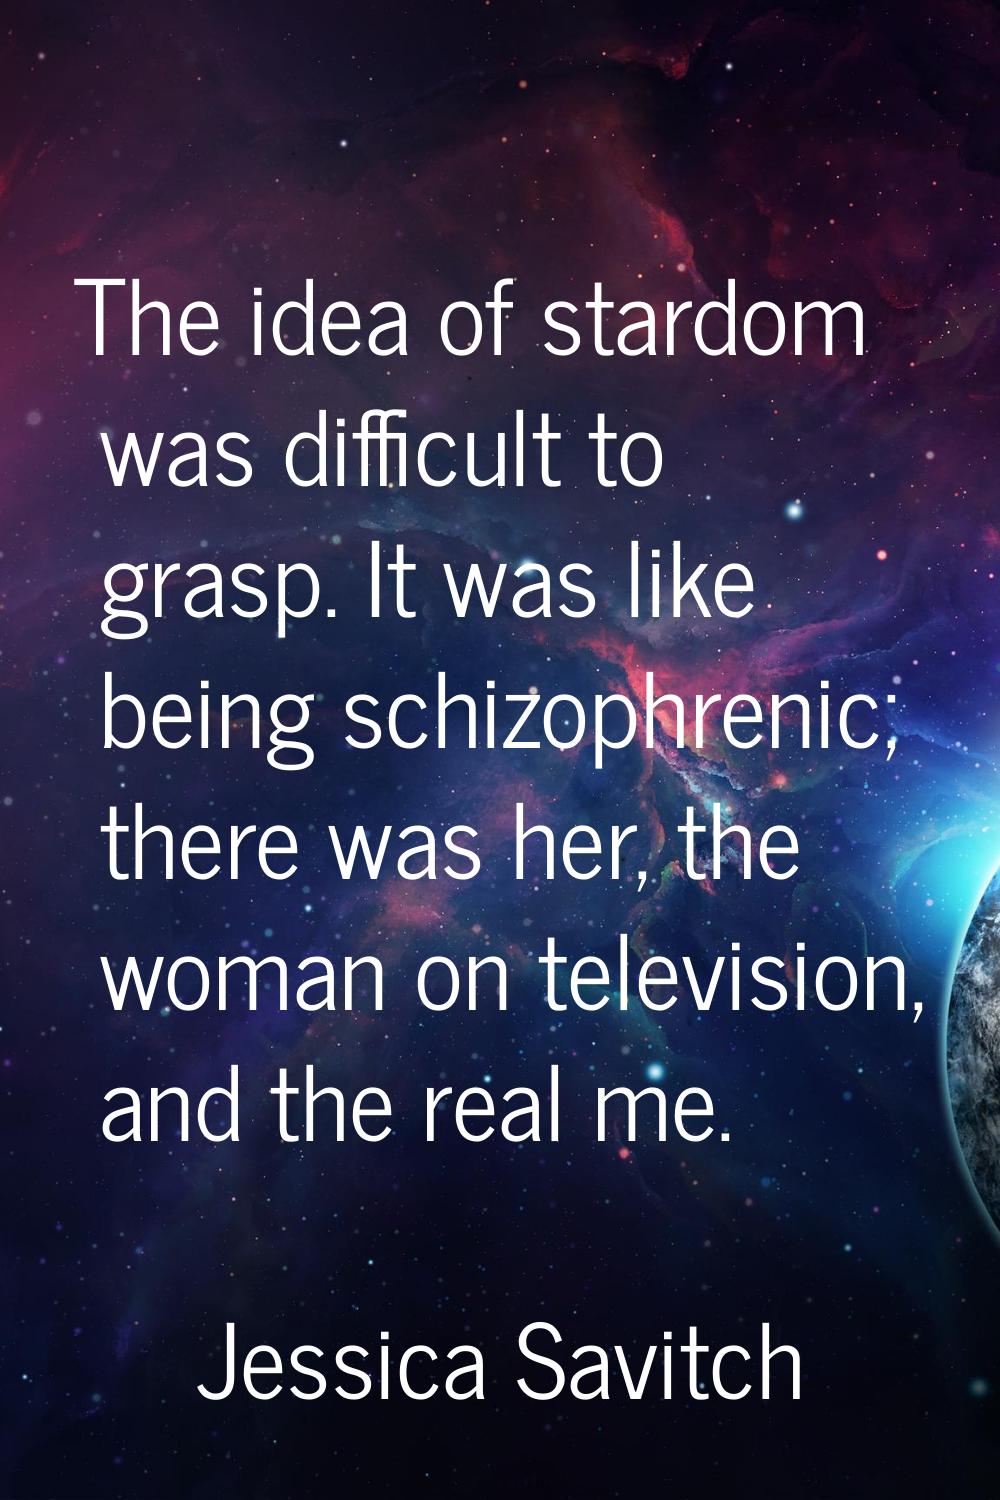 The idea of stardom was difficult to grasp. It was like being schizophrenic; there was her, the wom